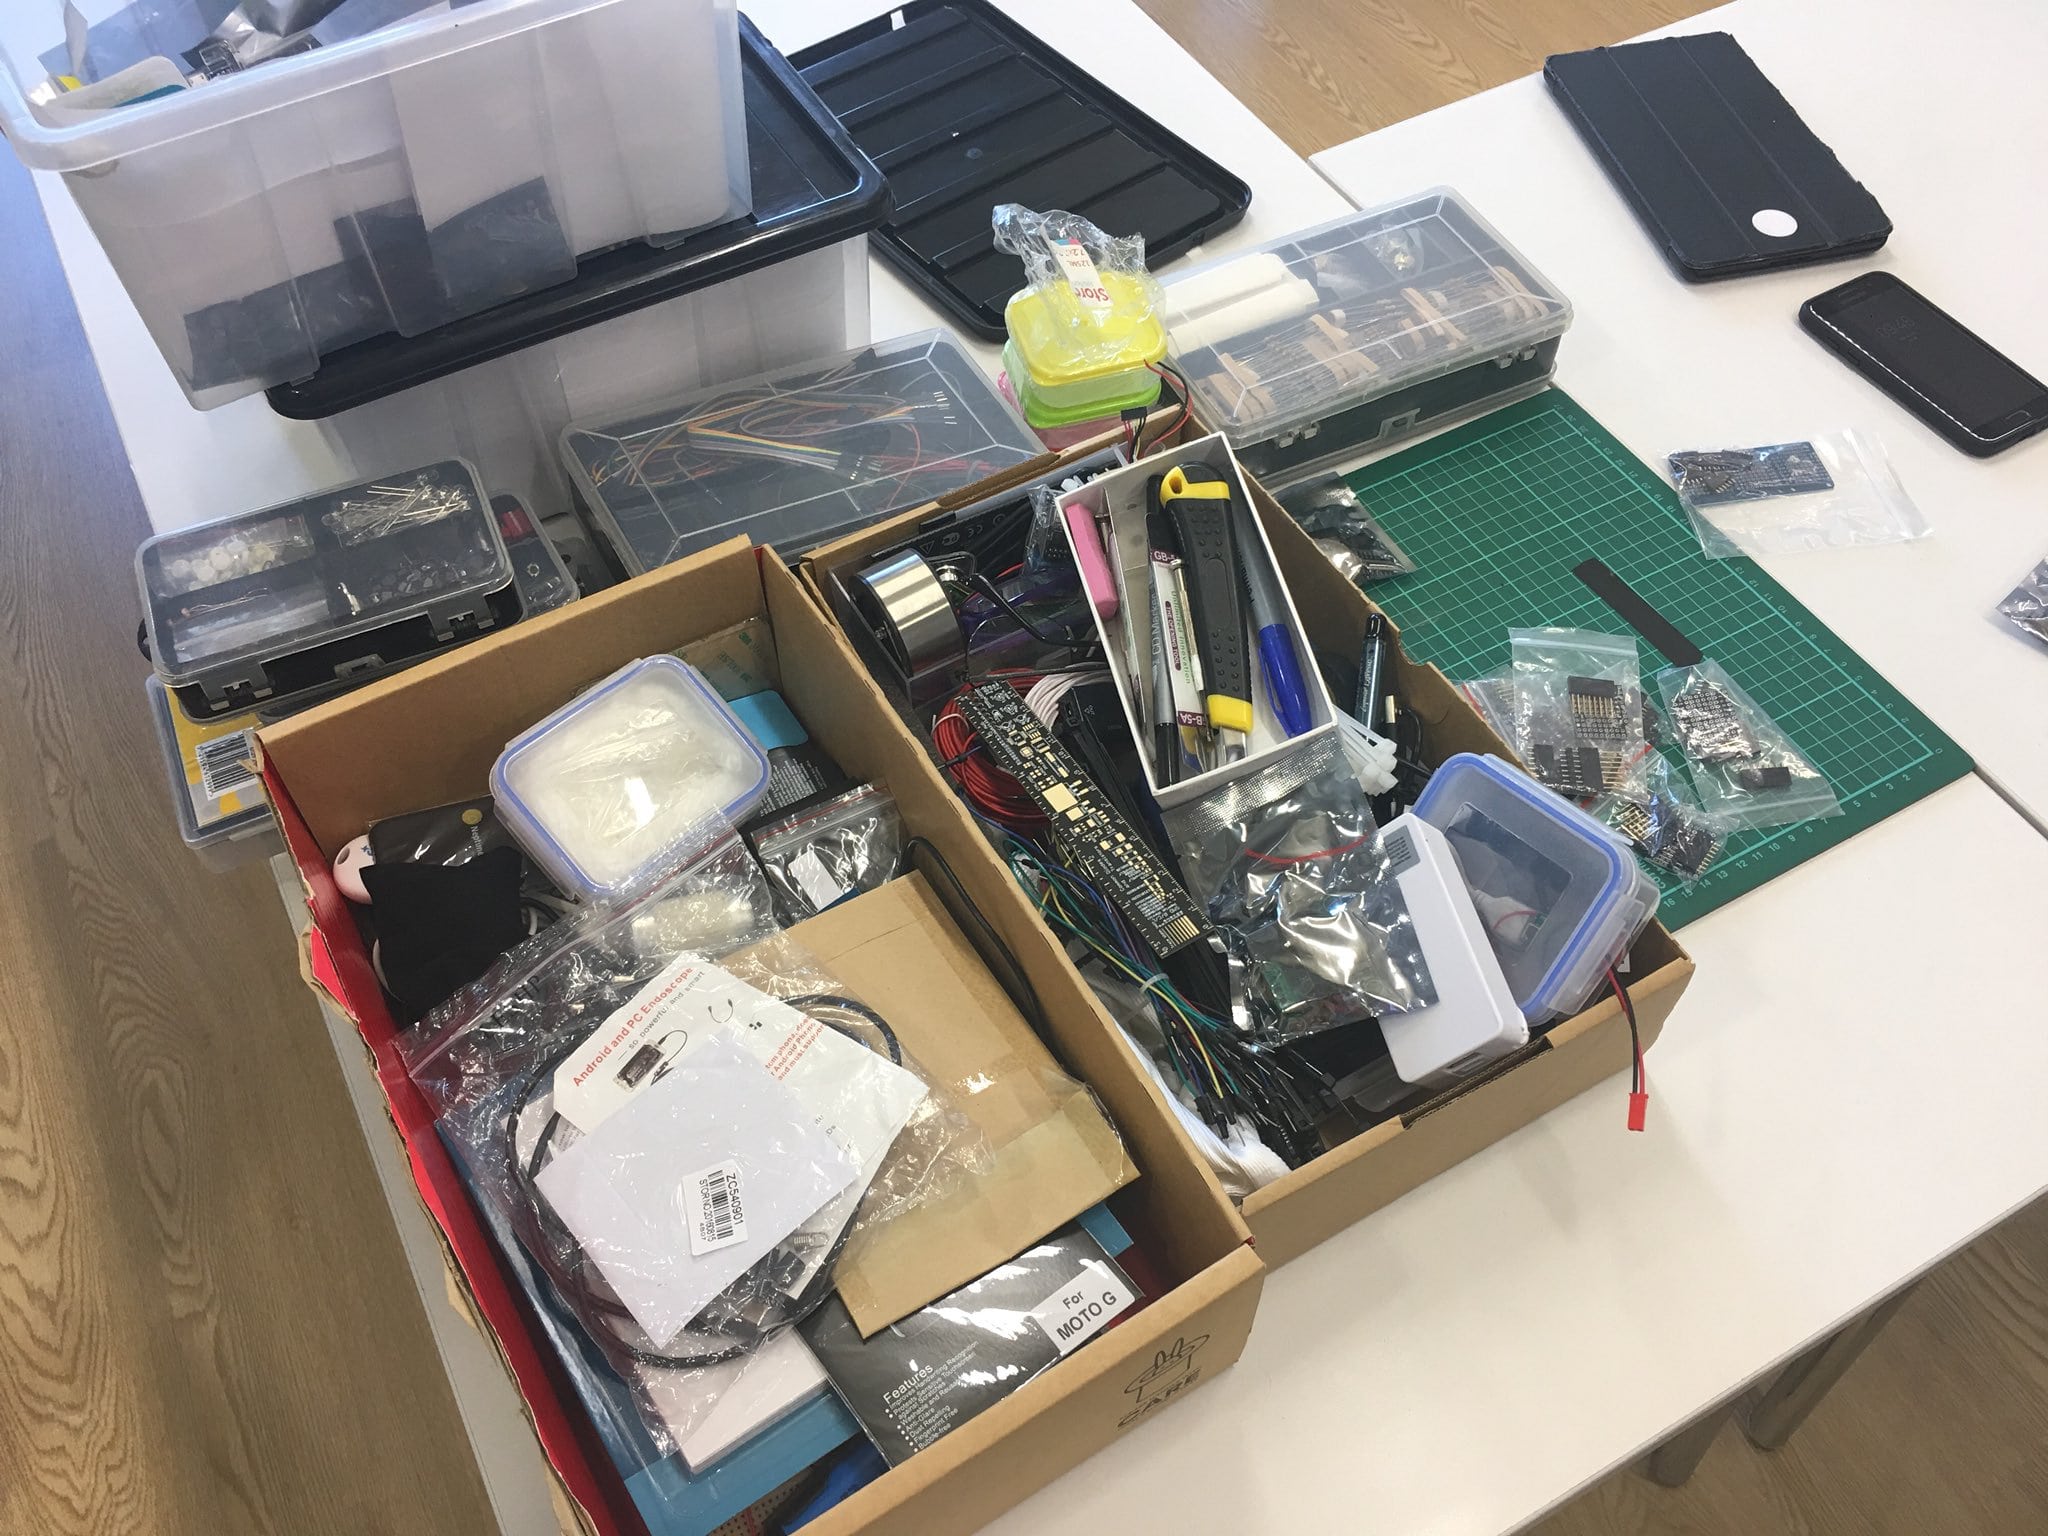 Boxes of electronic components spread across a desk